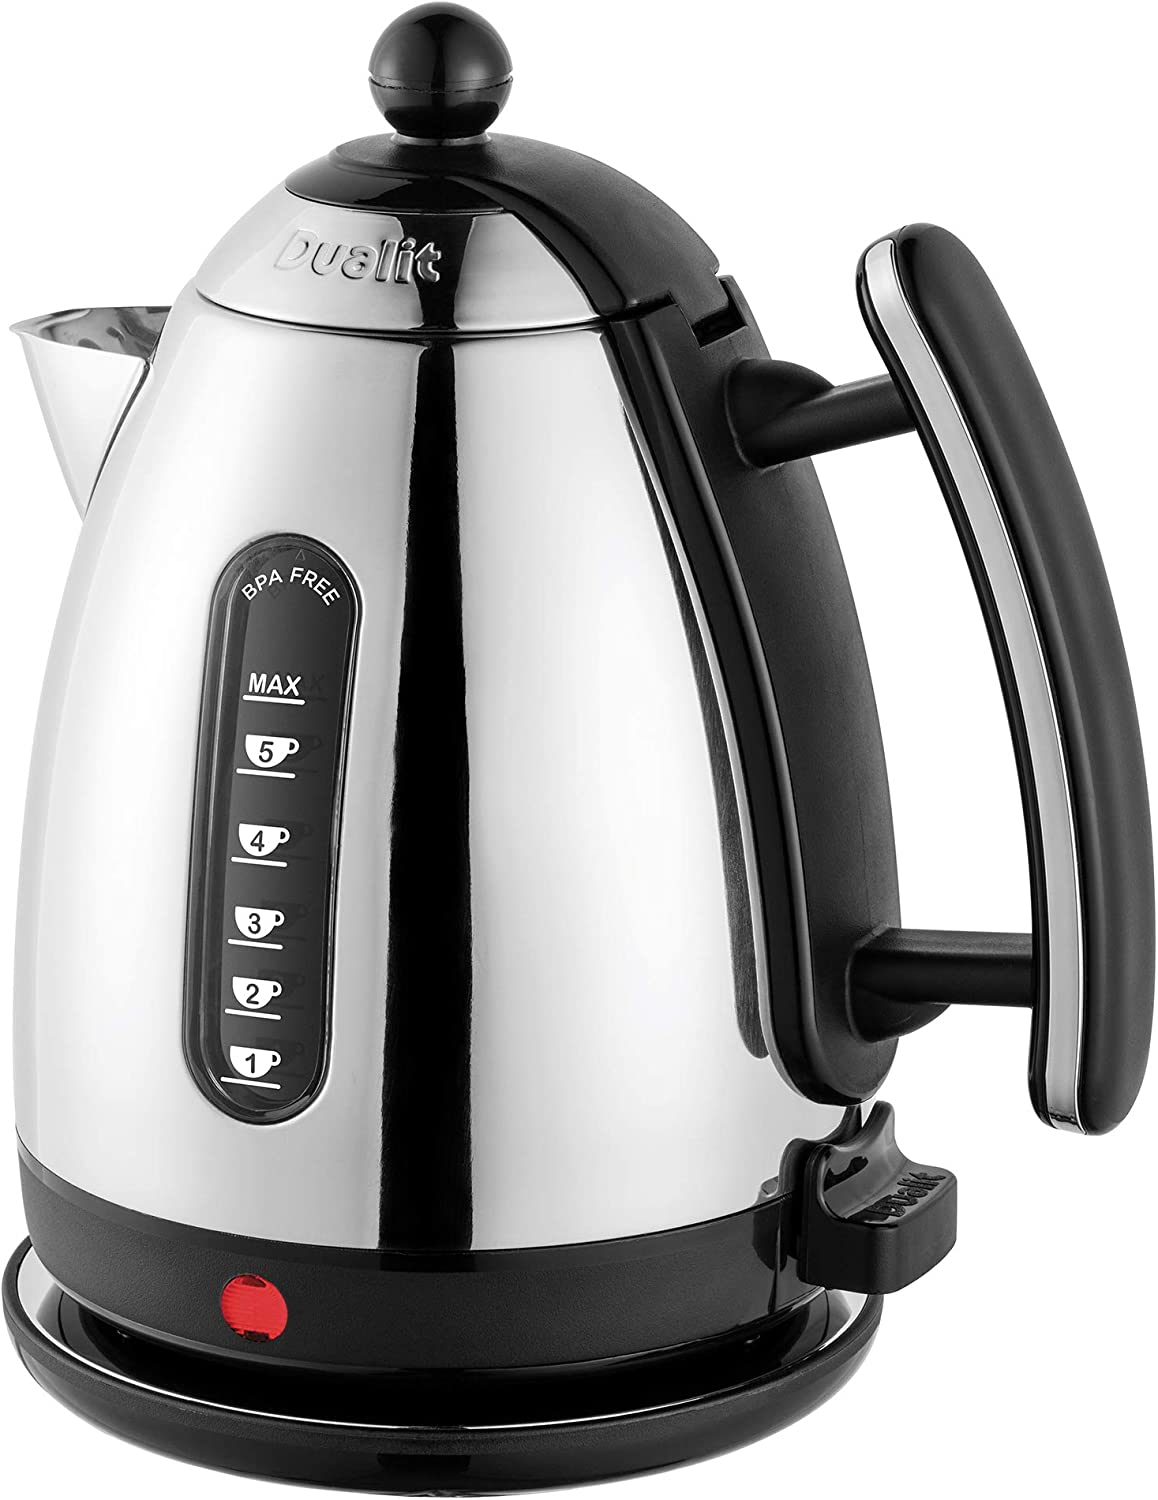 Dualit 1.5L Cordless Jug Kettle Black and Stainless Steel